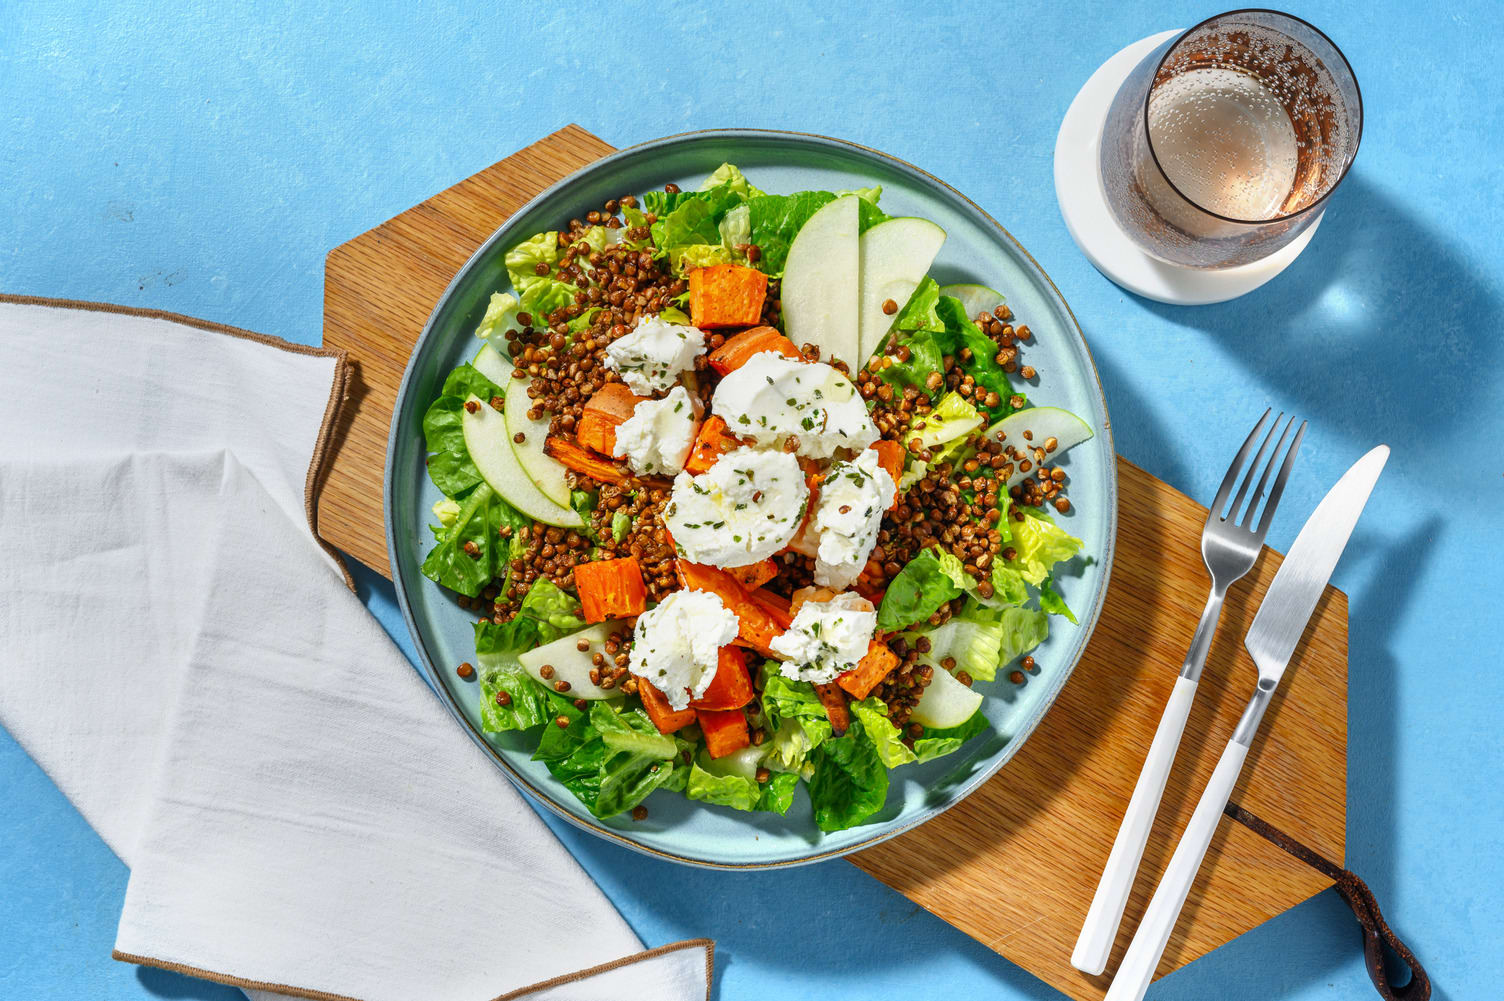 Sweet Potato and Goat's Cheese Salad